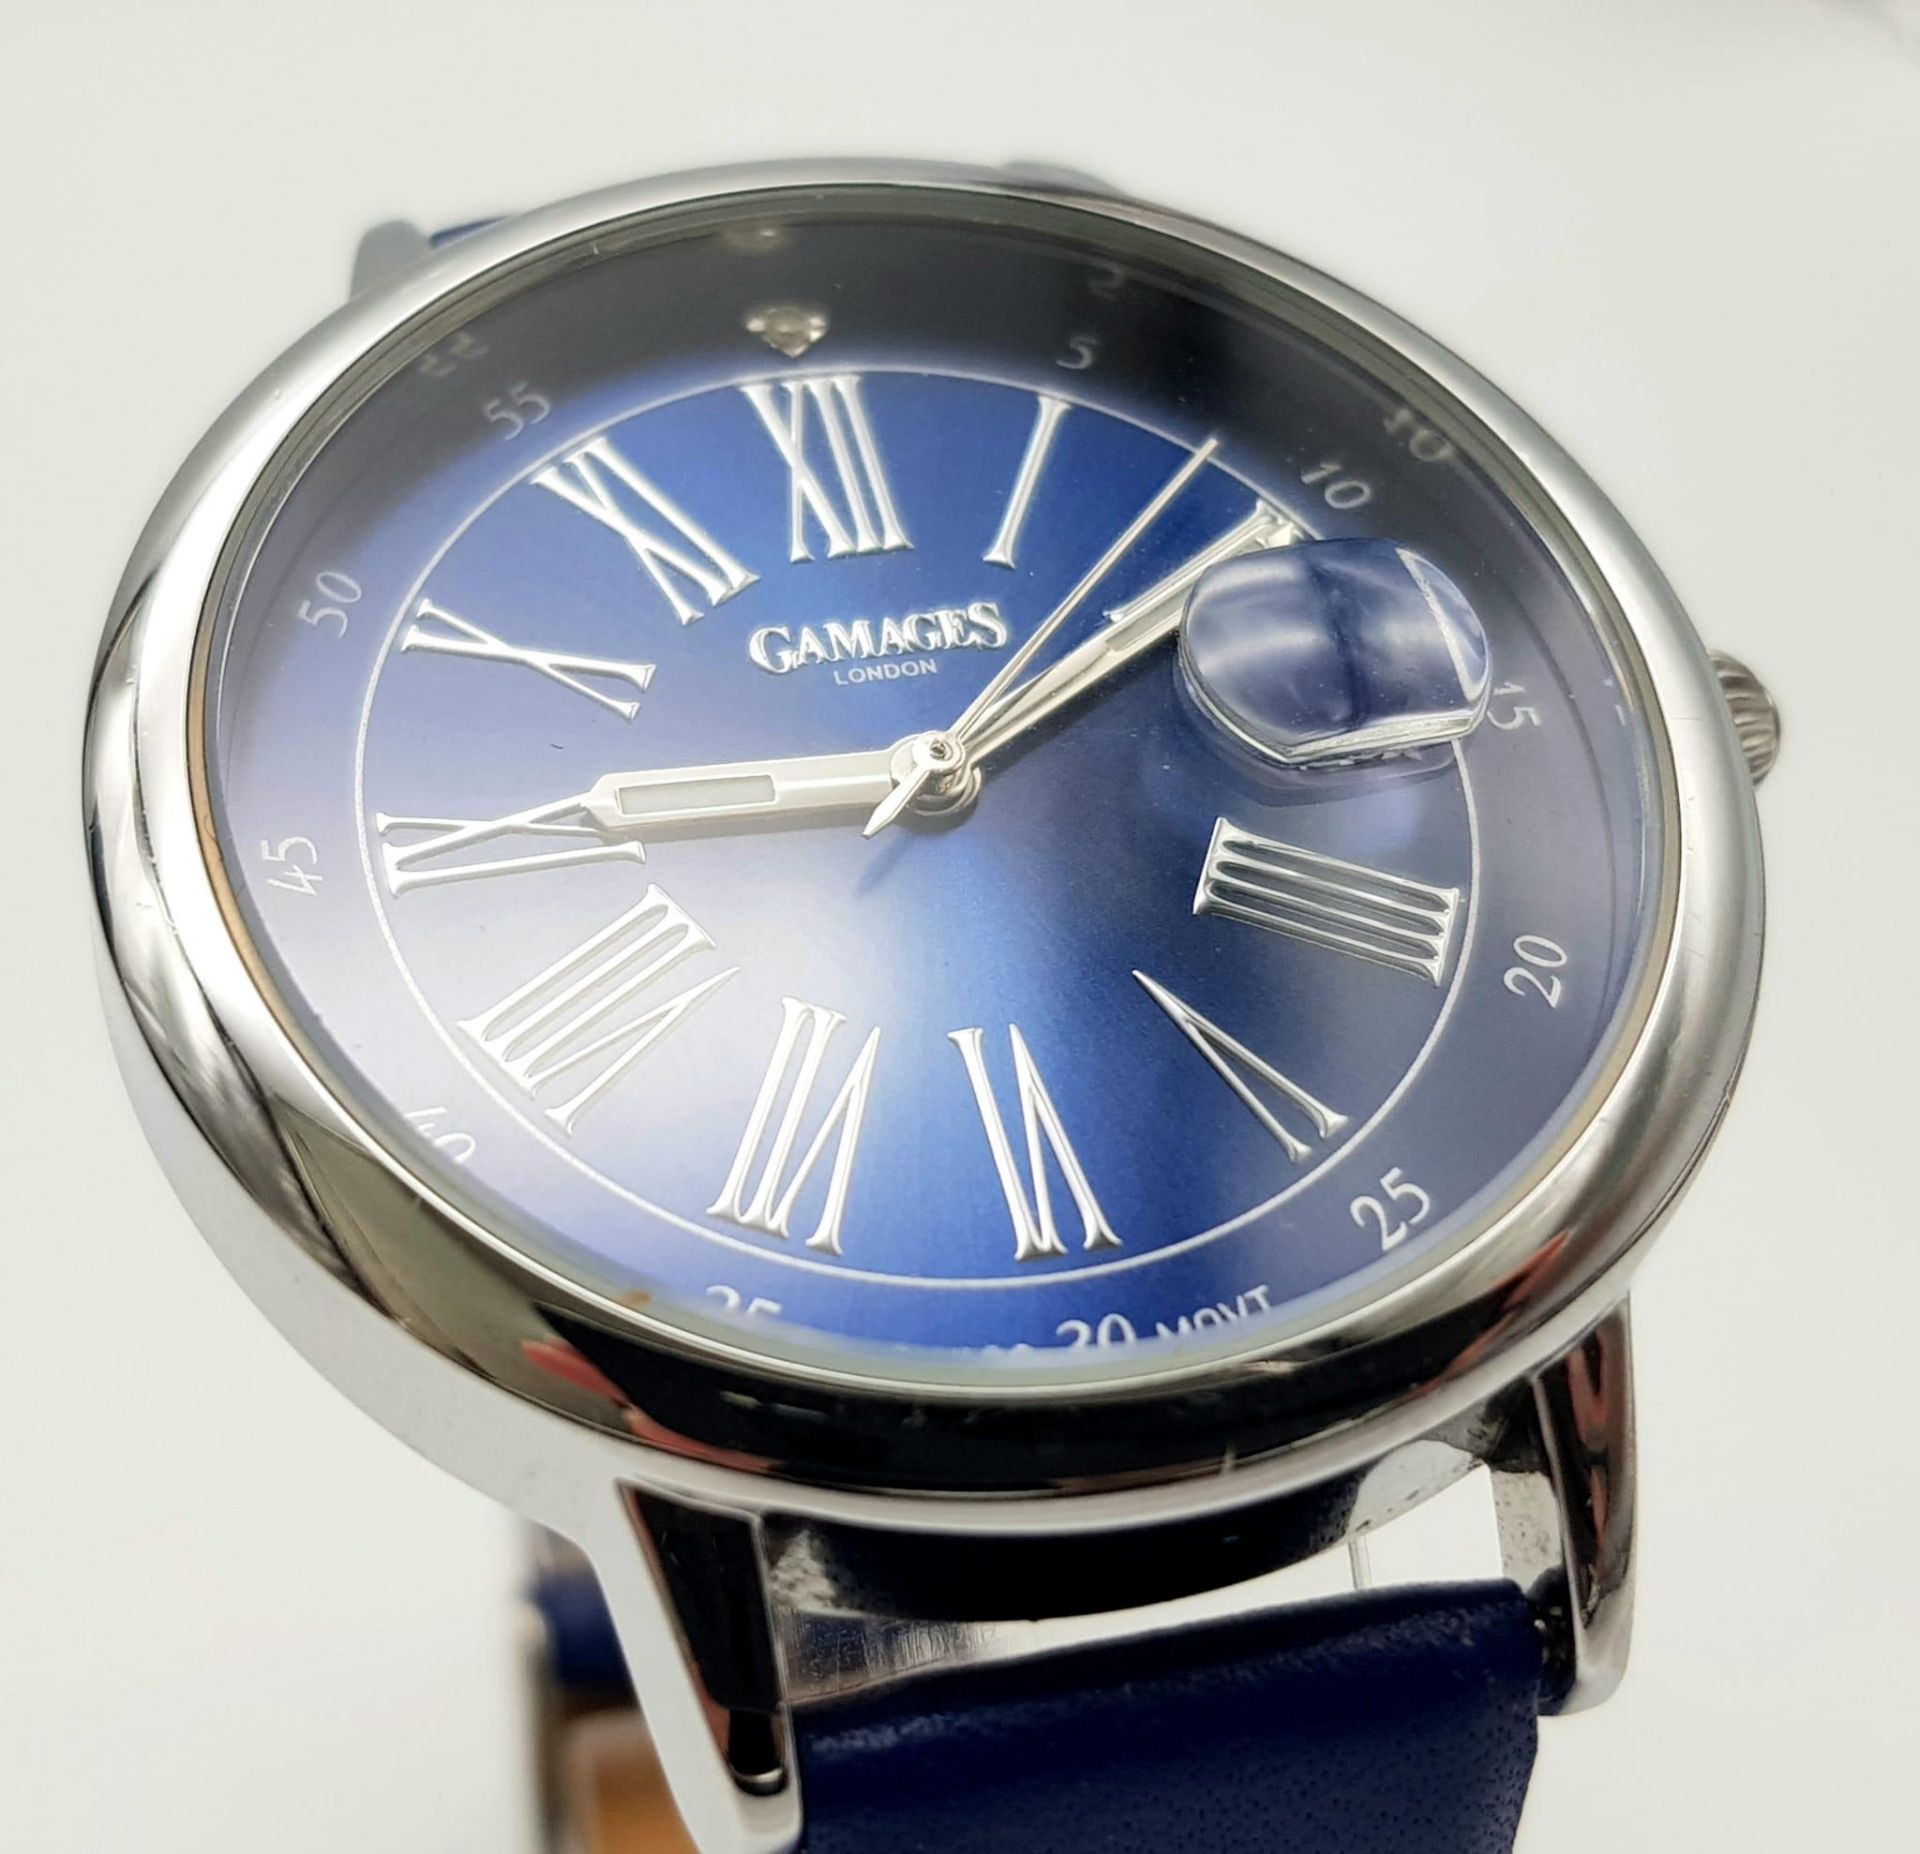 A Gamages of London Quartz Ladies Watch. Blue leather strap. Stainless steel case - 37mm. Ice blue - Image 3 of 6